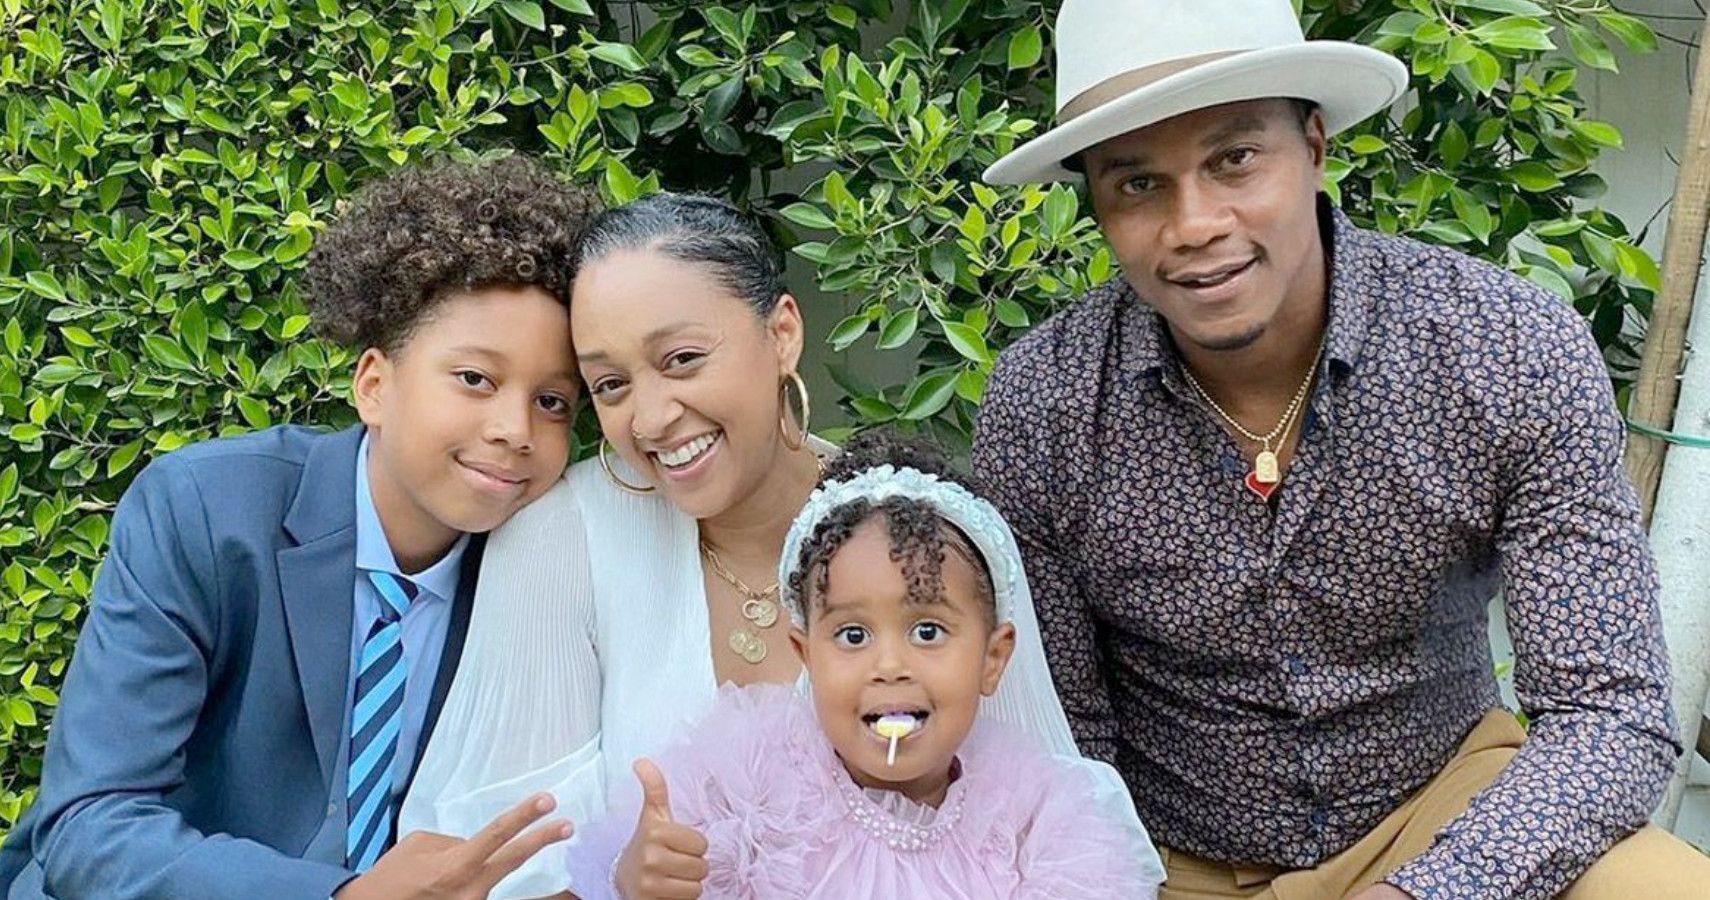 Tia Mowry Challenges Spousal Support Amid Divorce From Cory Hardrict